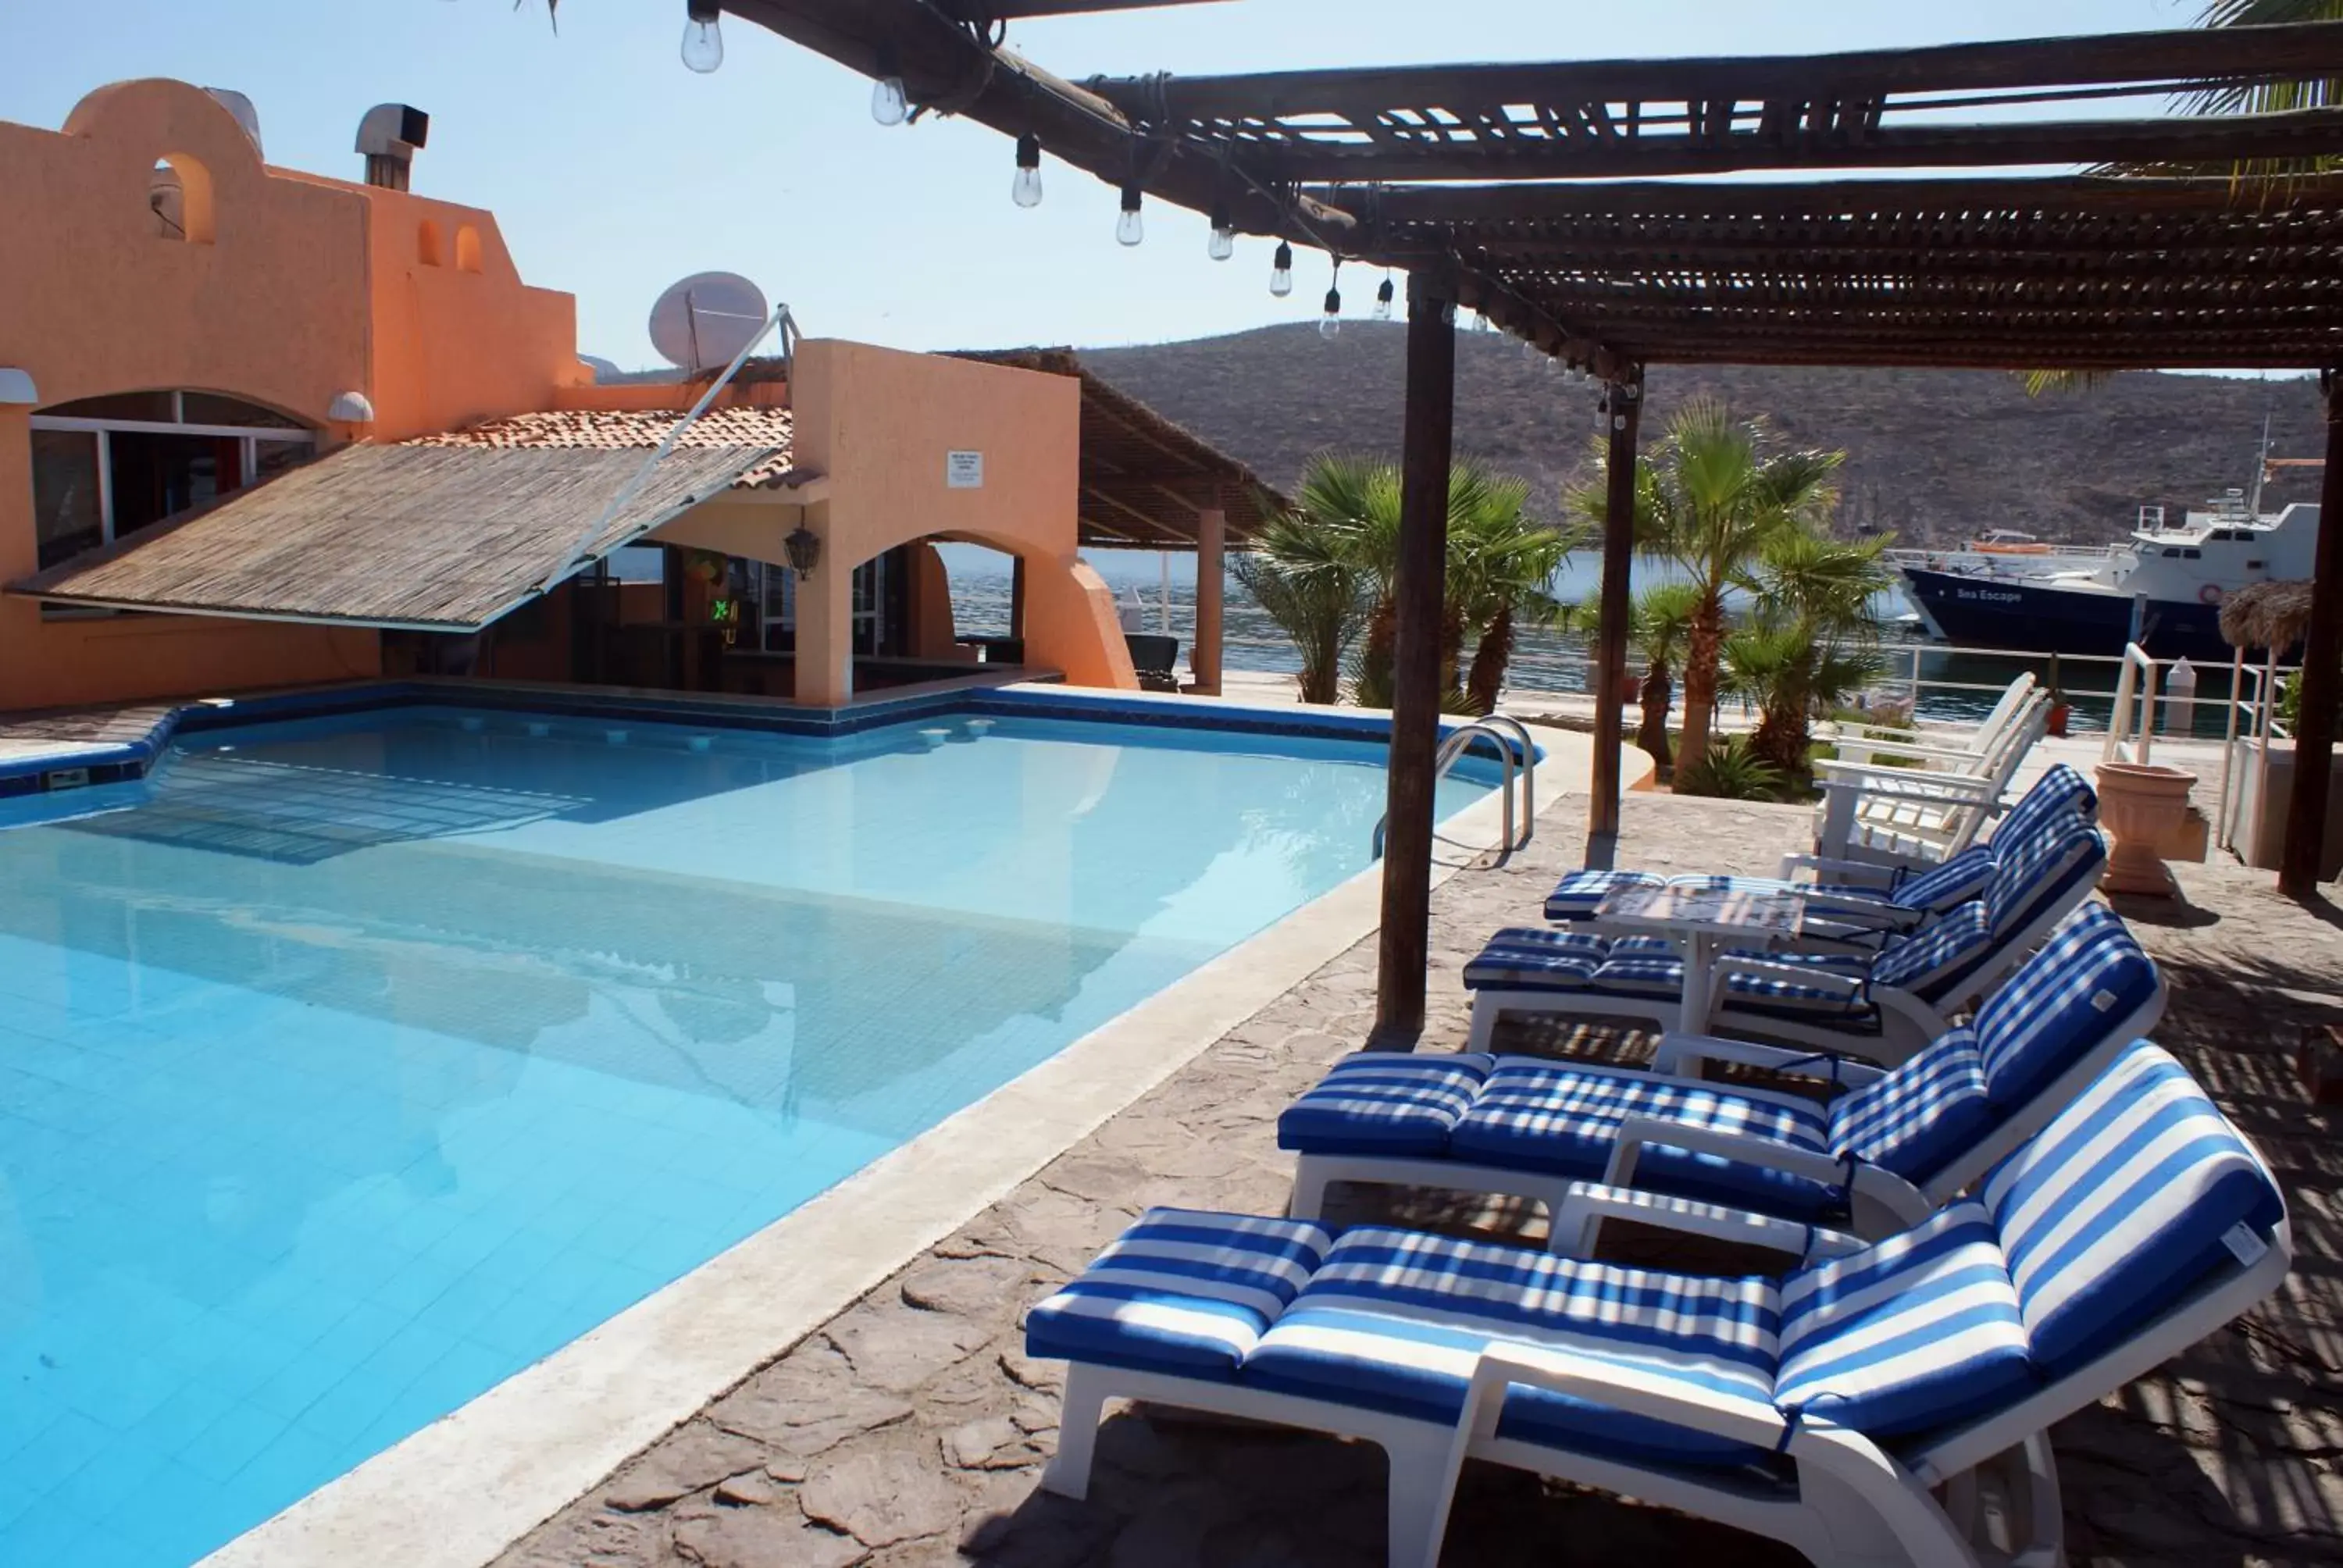 Day, Swimming Pool in Club Hotel Cantamar by the Beach